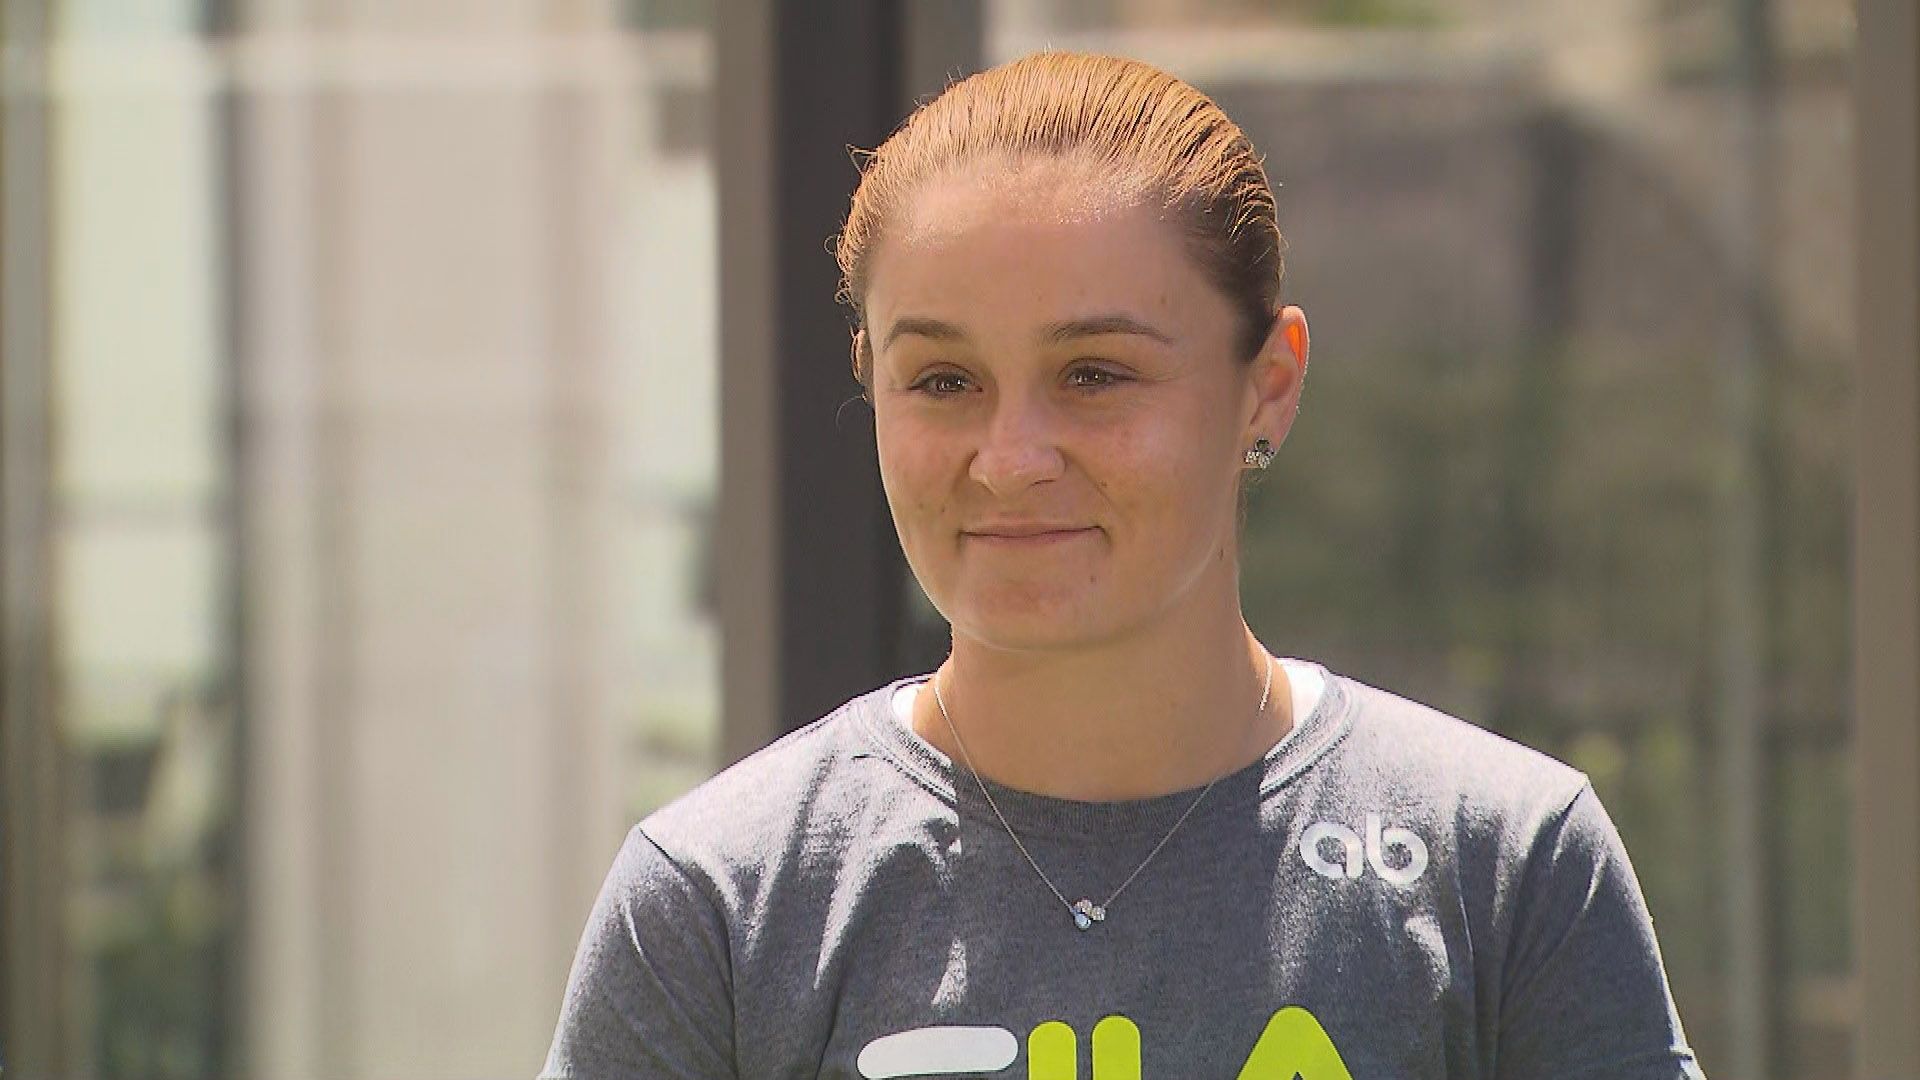 Ash Barty retirement news: World No.1 says she's 'not hiding anything' with unexpected call, refuses to rule out switching sports